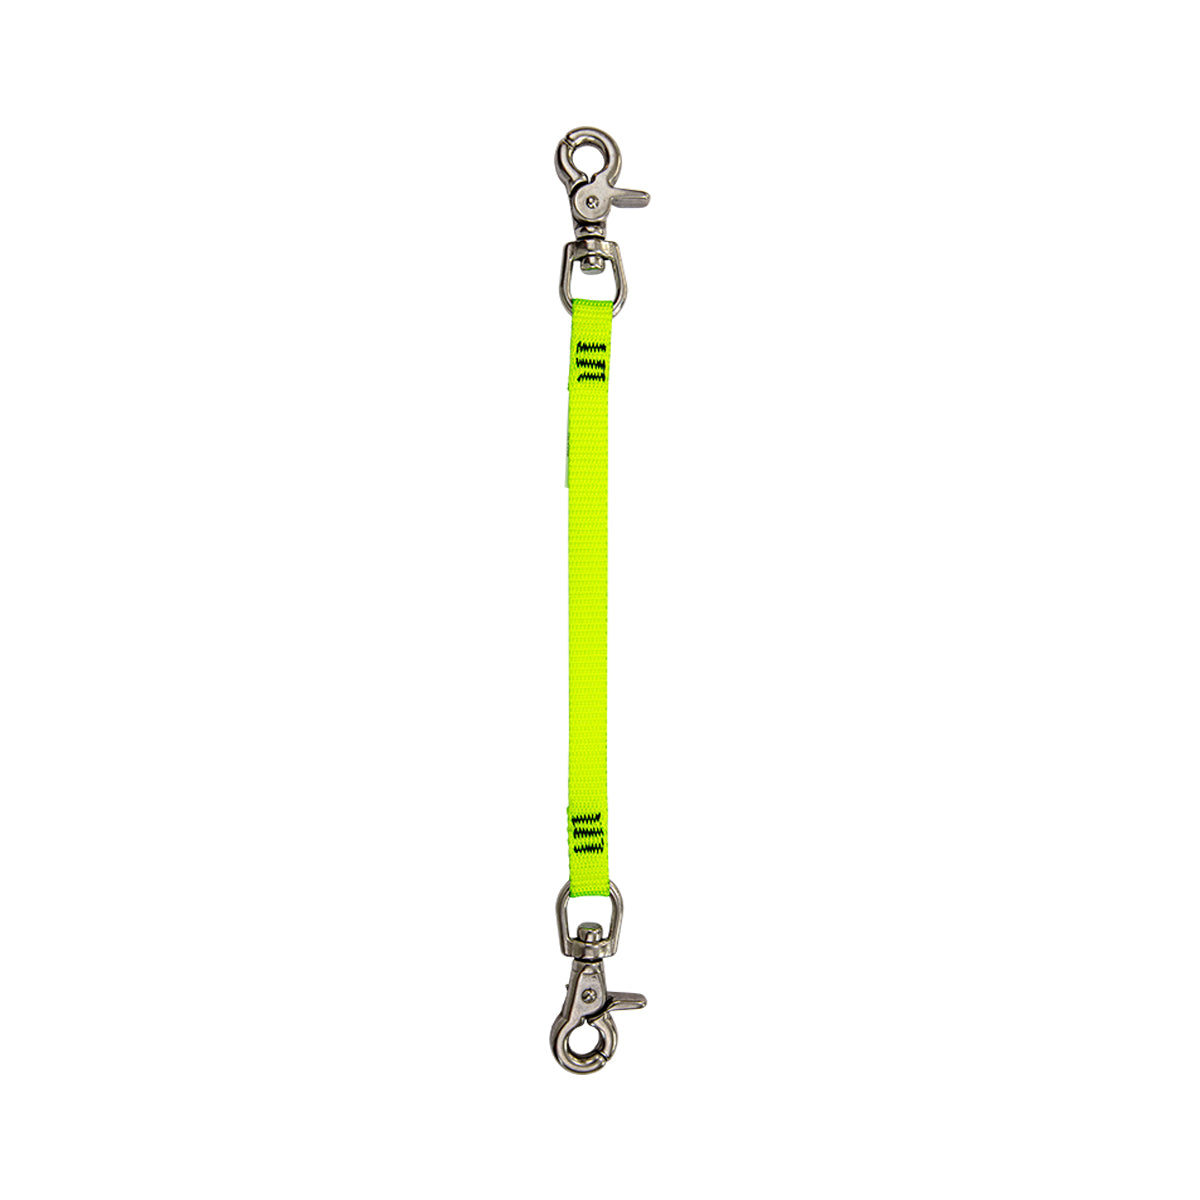 5 lb. 12" Tool Tether: 10 pack